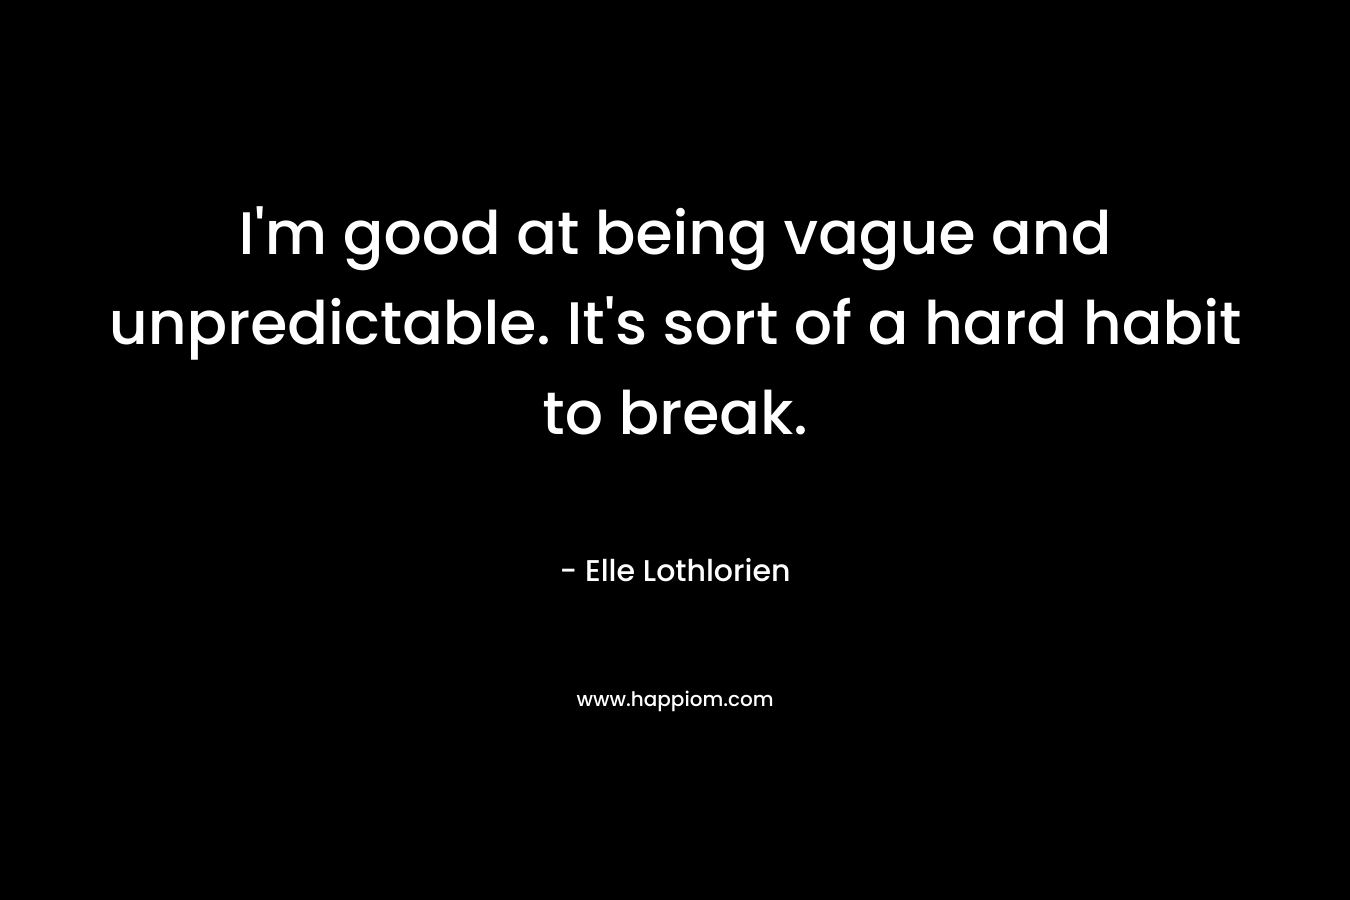 I’m good at being vague and unpredictable. It’s sort of a hard habit to break. – Elle Lothlorien